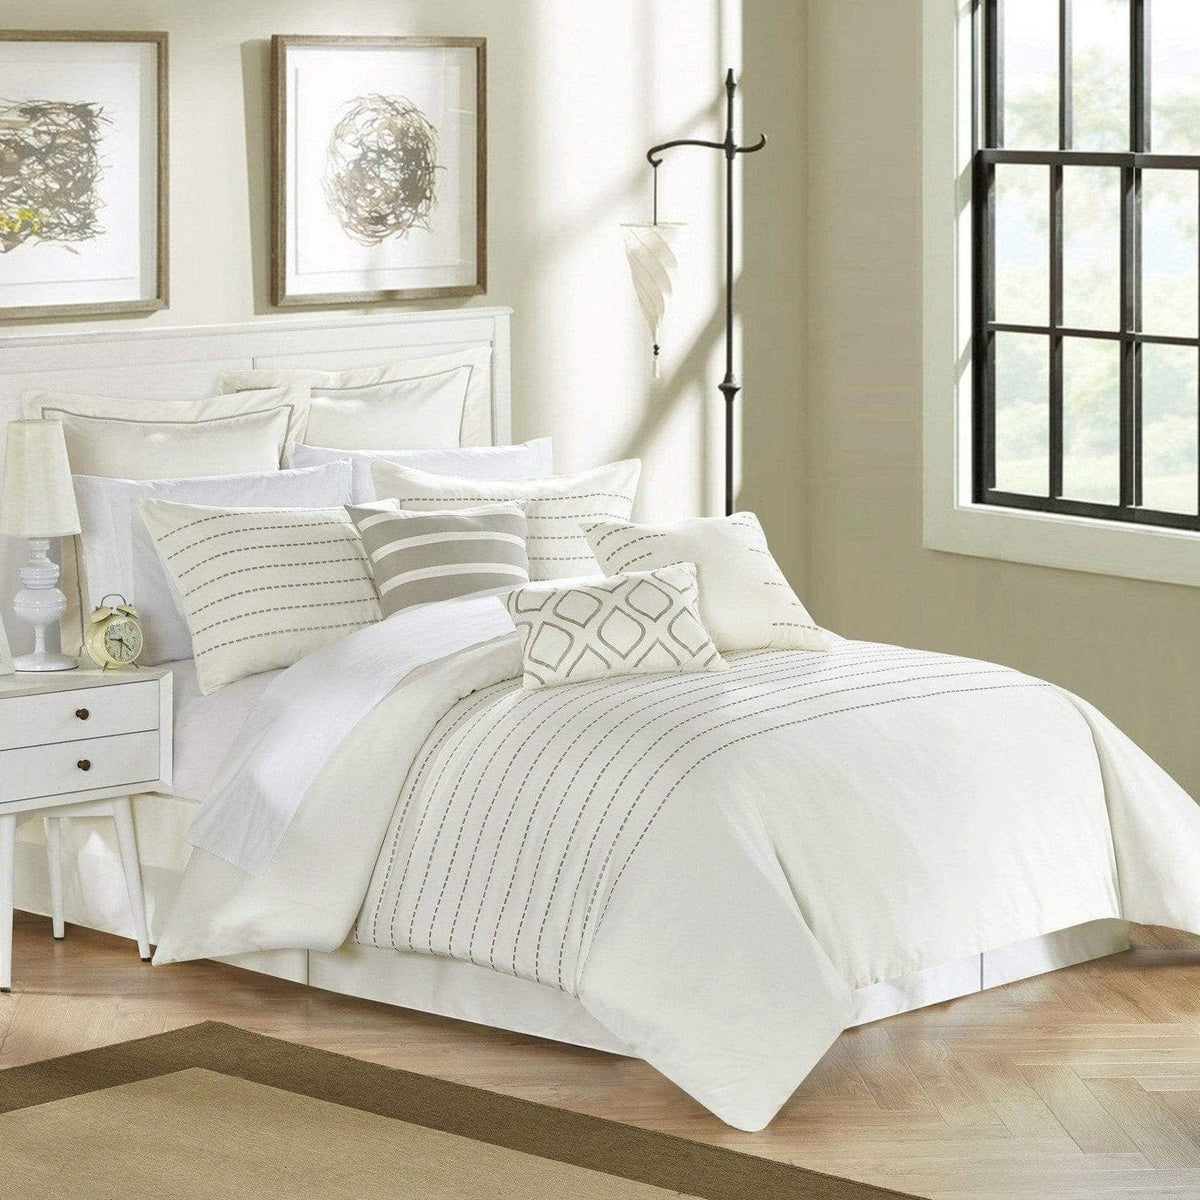 Chic Home Brenton 9 Piece Embroidered Comforter Set 